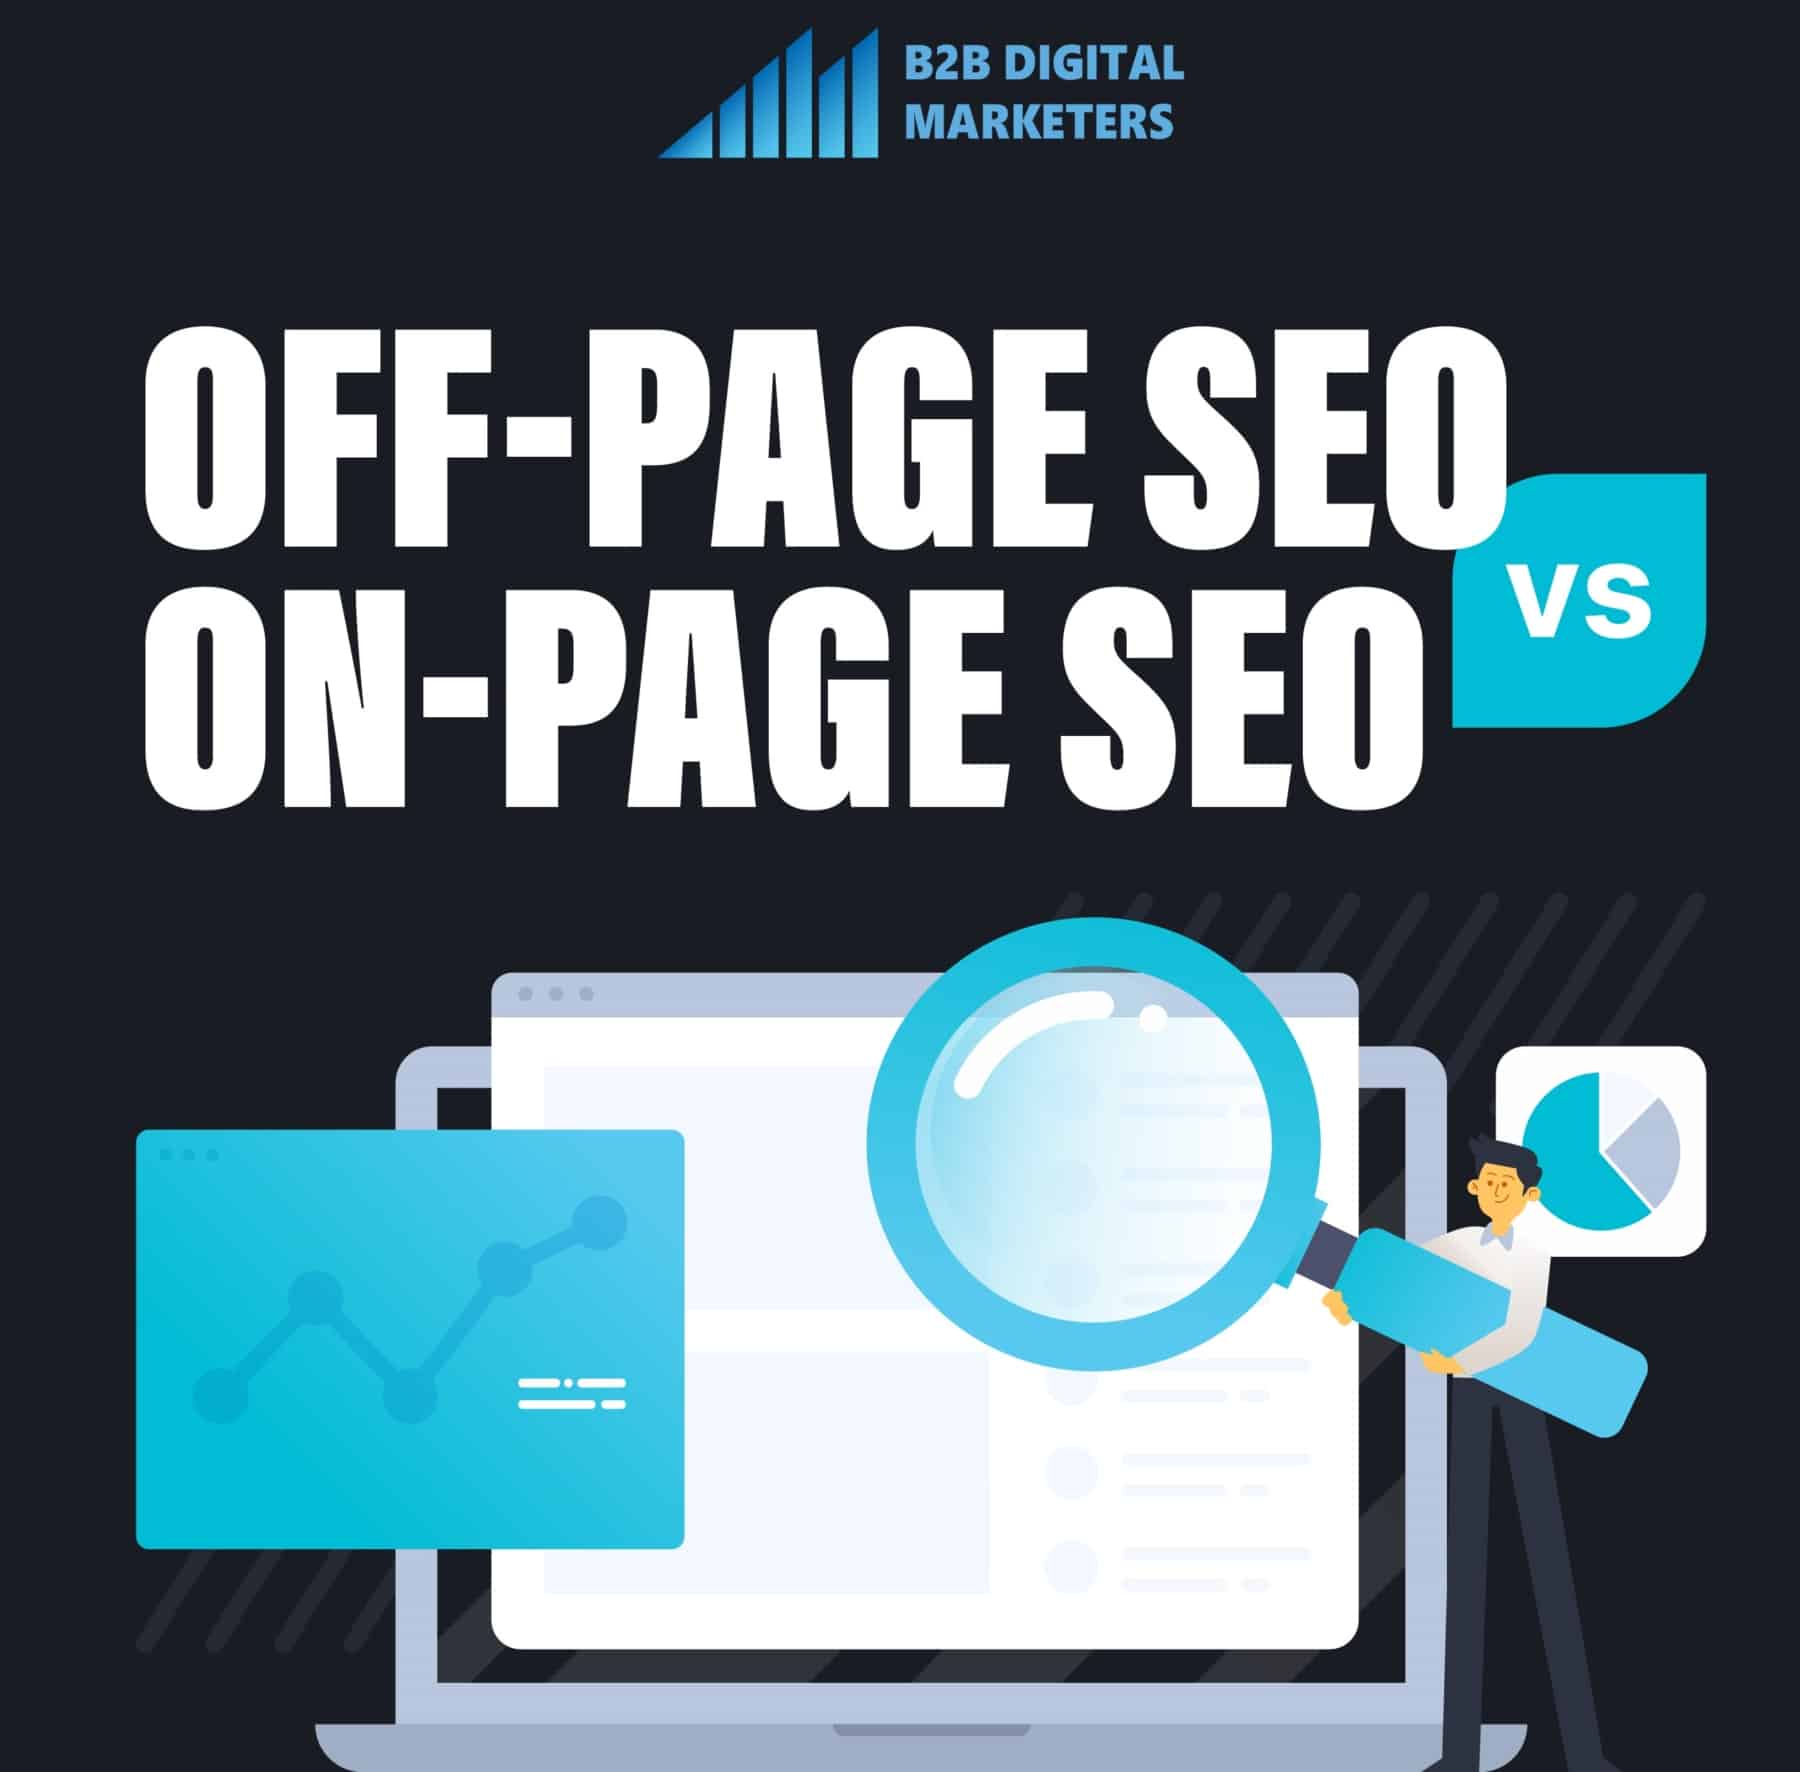 on-page seo vs off-page seo